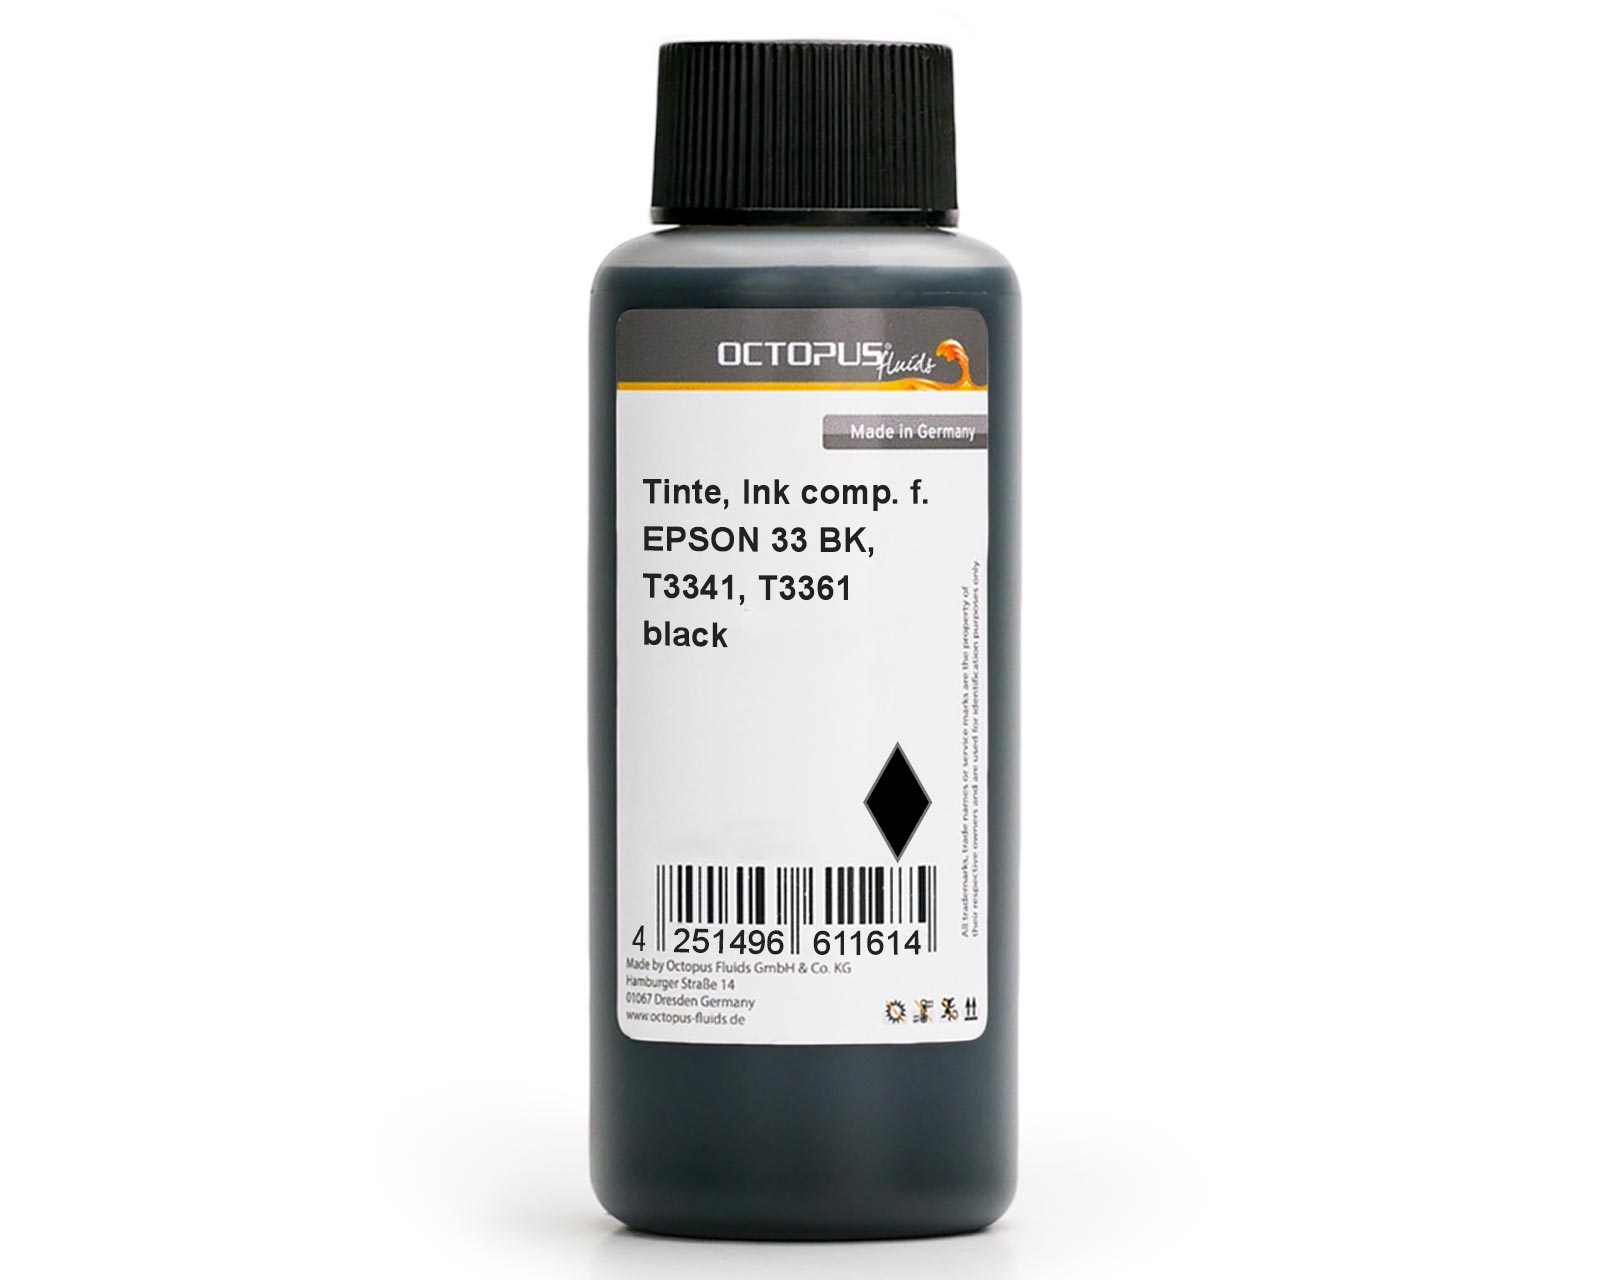 Refill ink for Epson 33, Expression Premium XP-530, XP-630, XP-830 a.o. black